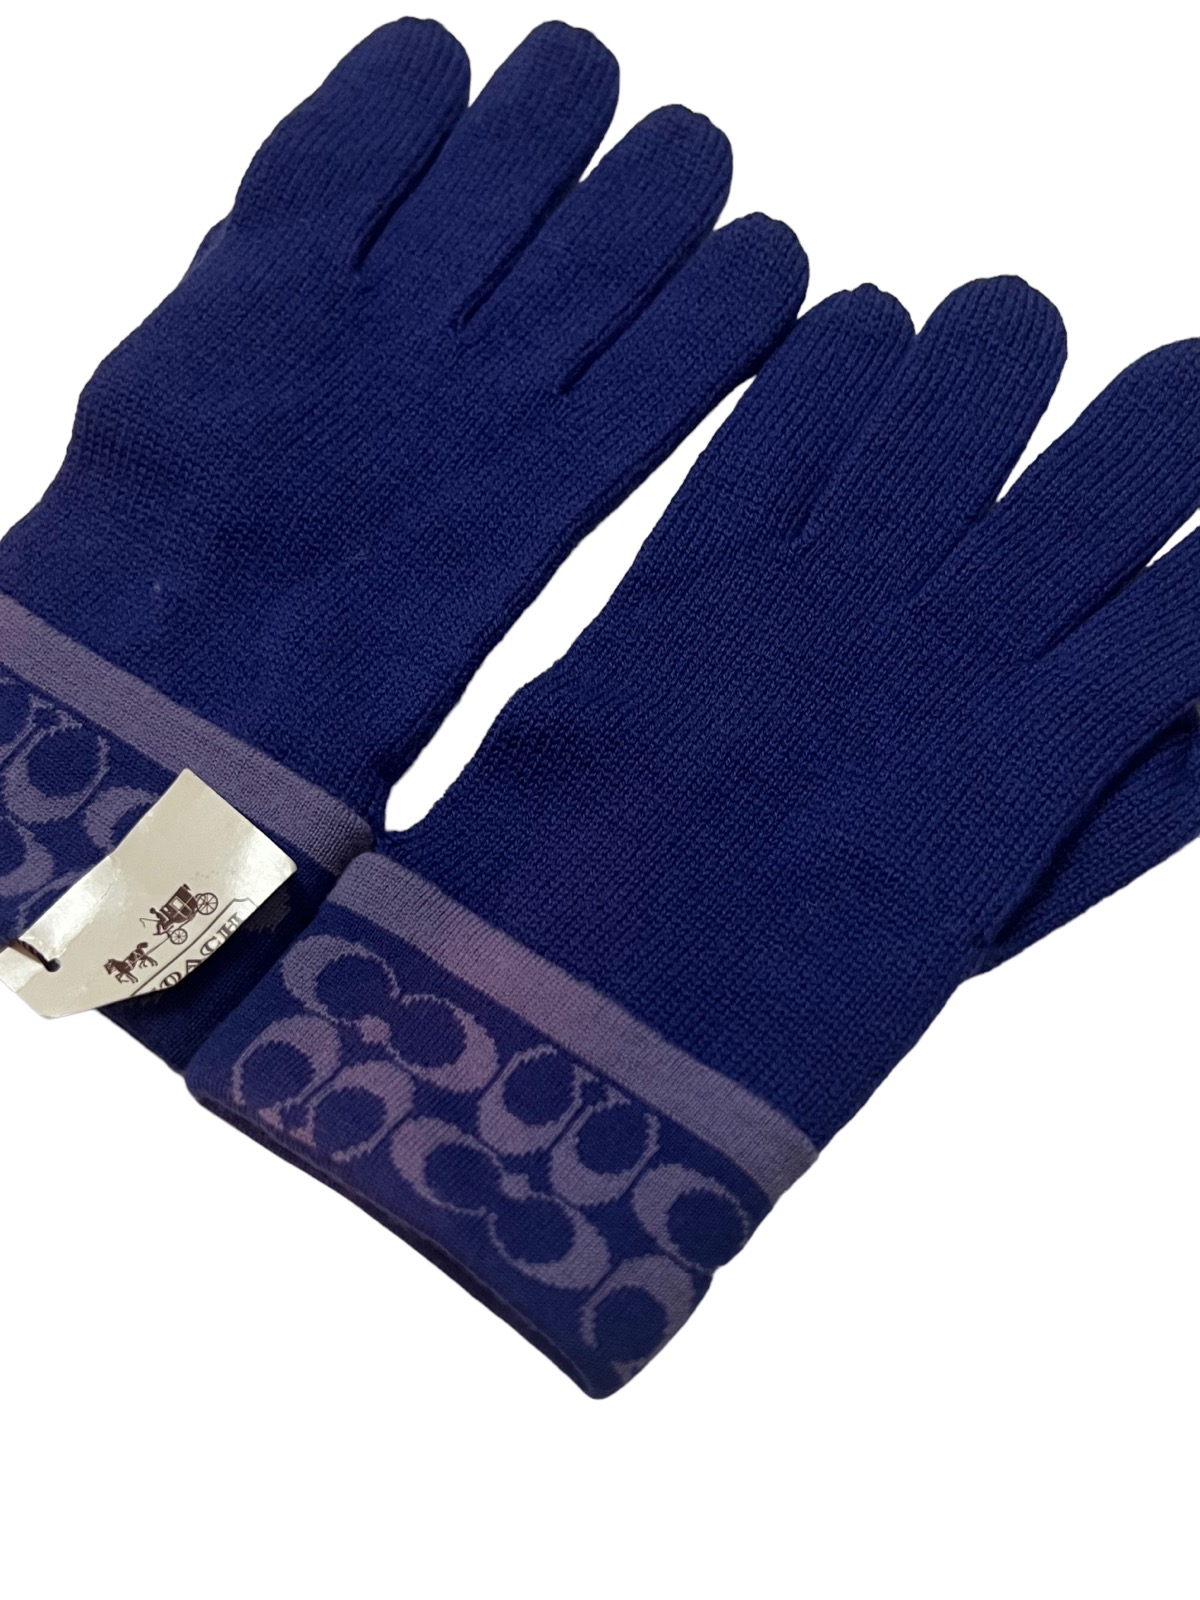 Coach - COACH ( NEW OLD STOCK ) (NOS) SIGNATURE KNIT TECH GLOVES - 4